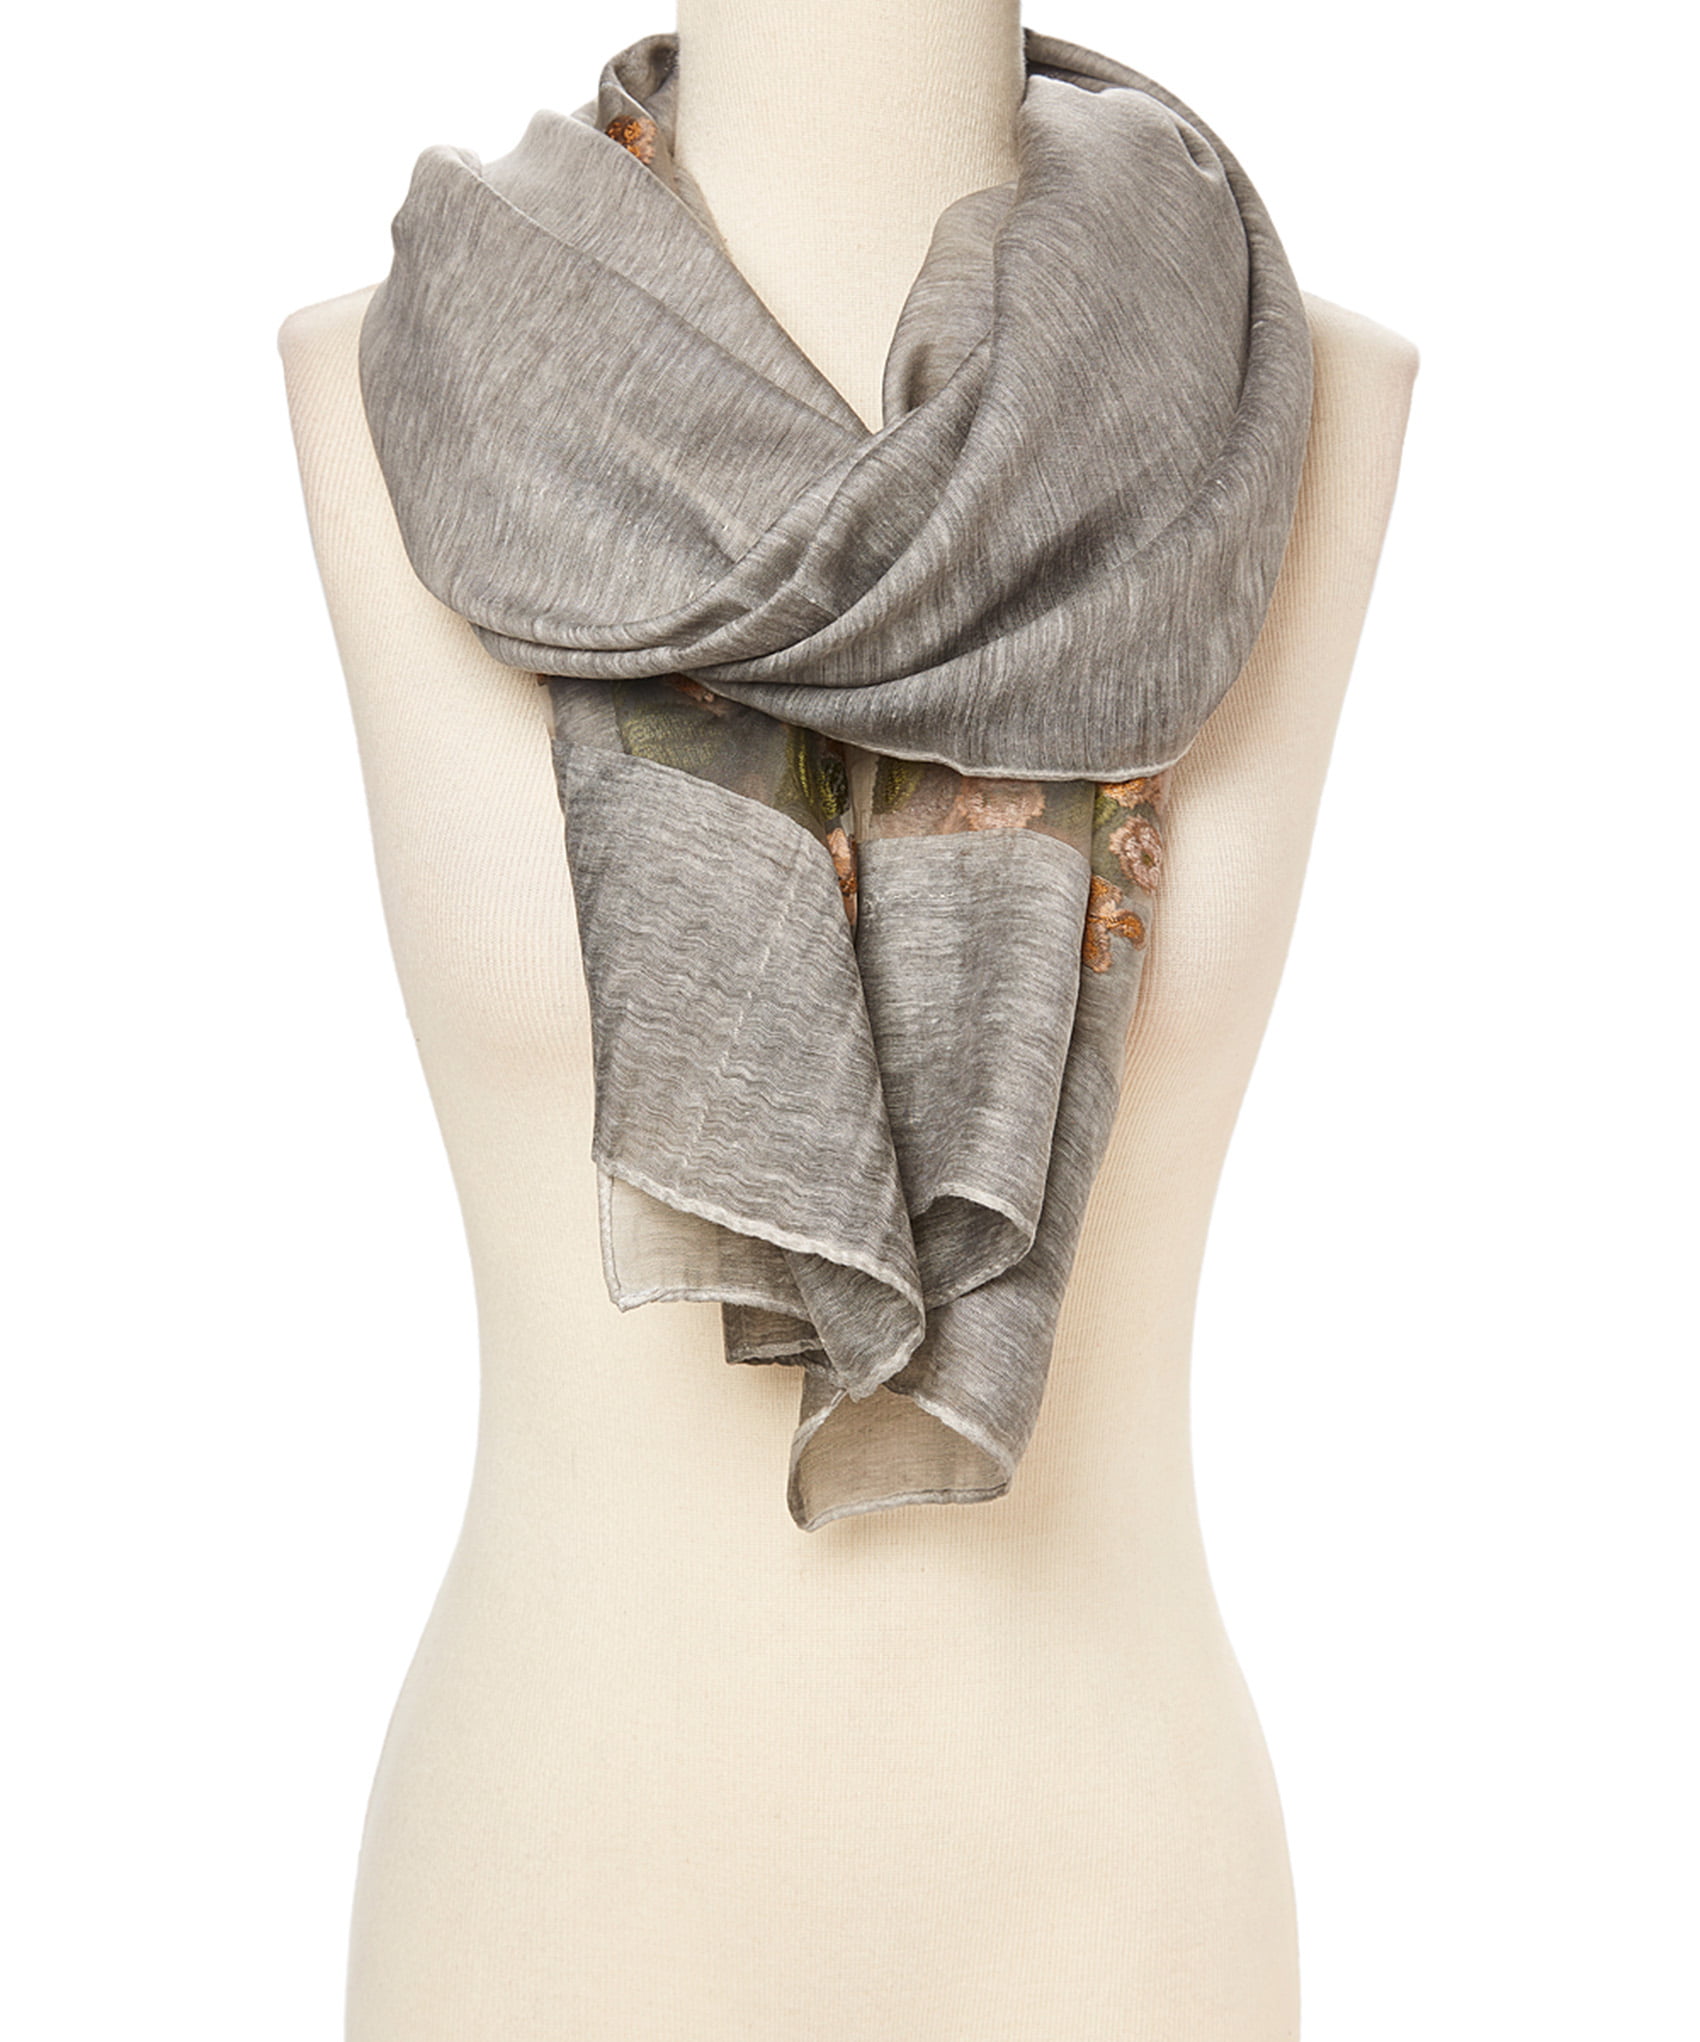 Christmas Gift New Year's Eve Party soft and fluid scarf Soft scarf for women in viscose with light gray and turquoise cashmere print